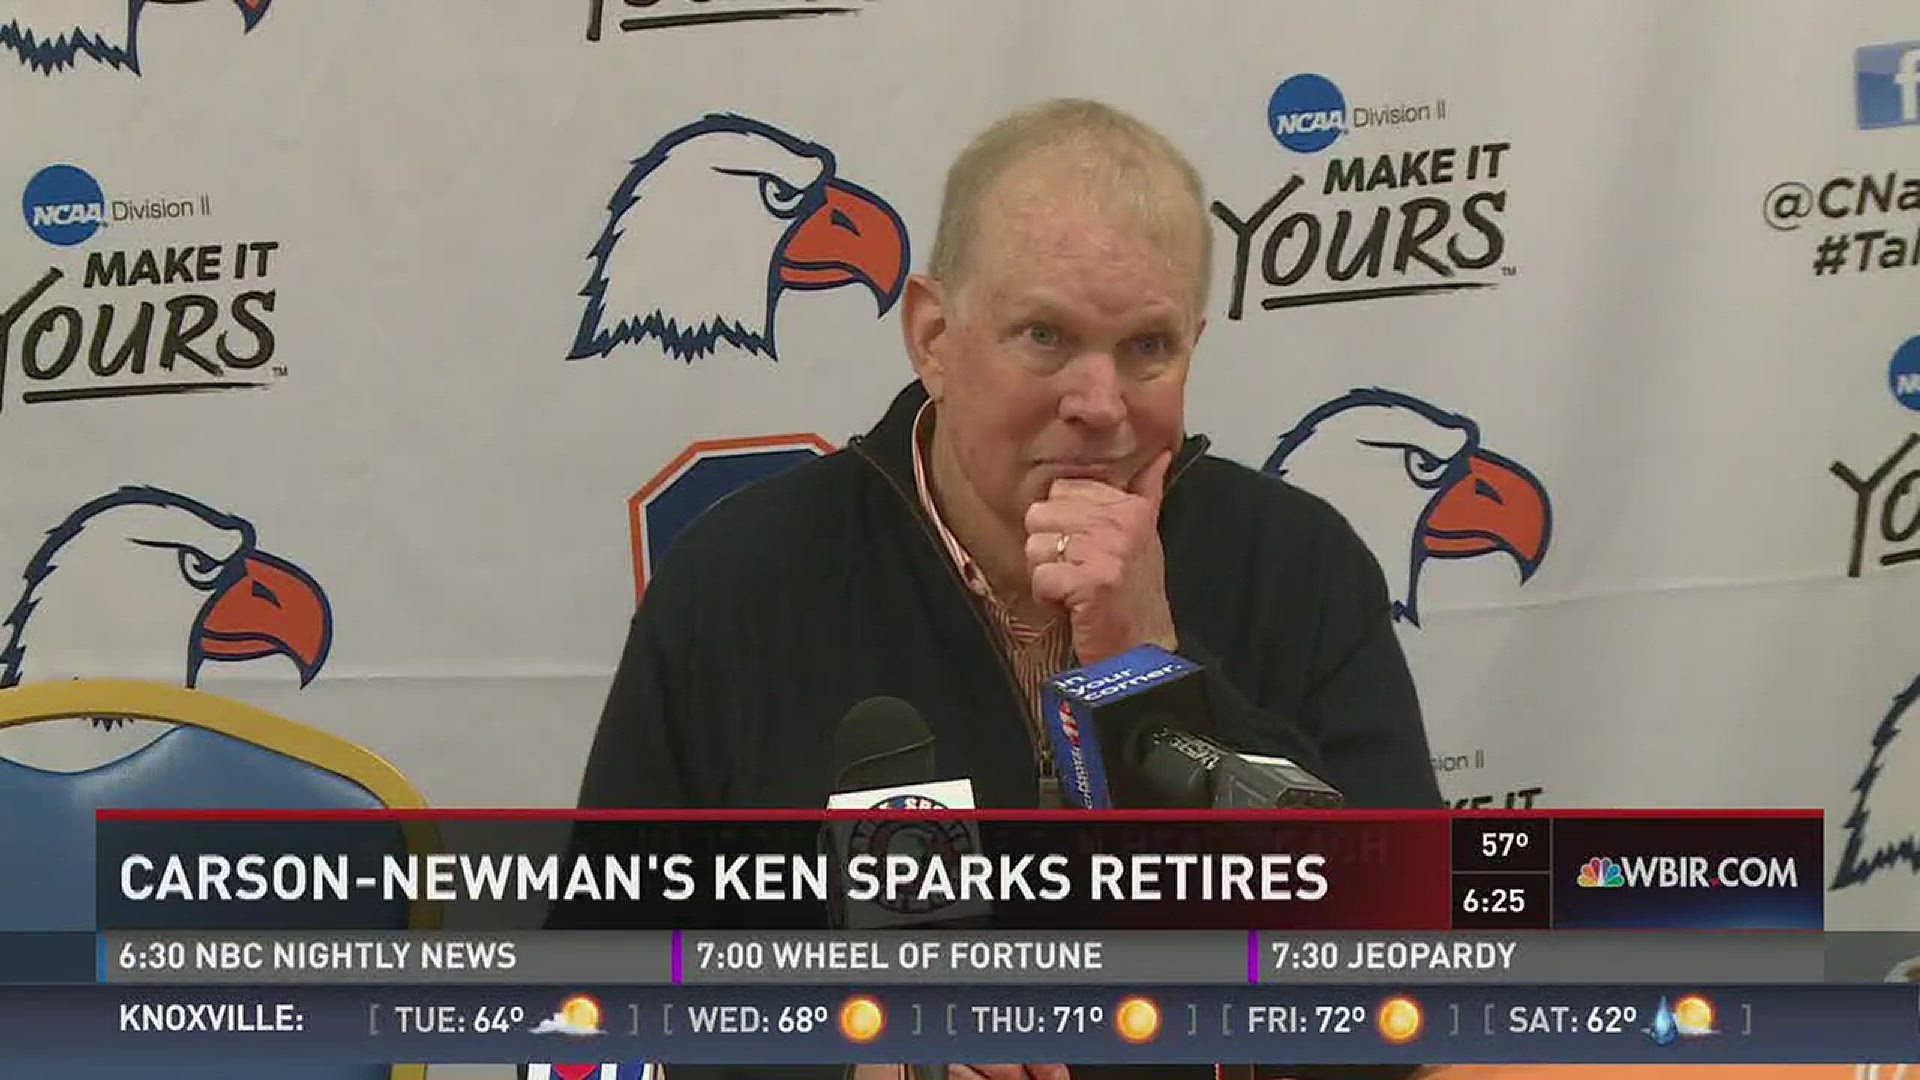 Nov. 14, 2016: After 37 seasons as head coach at Carson-Newman, Ken Sparks is retiring. With 338 career wins, his true legacy can not be found in the trophy case or on the scoreboard but in the heart of his players.